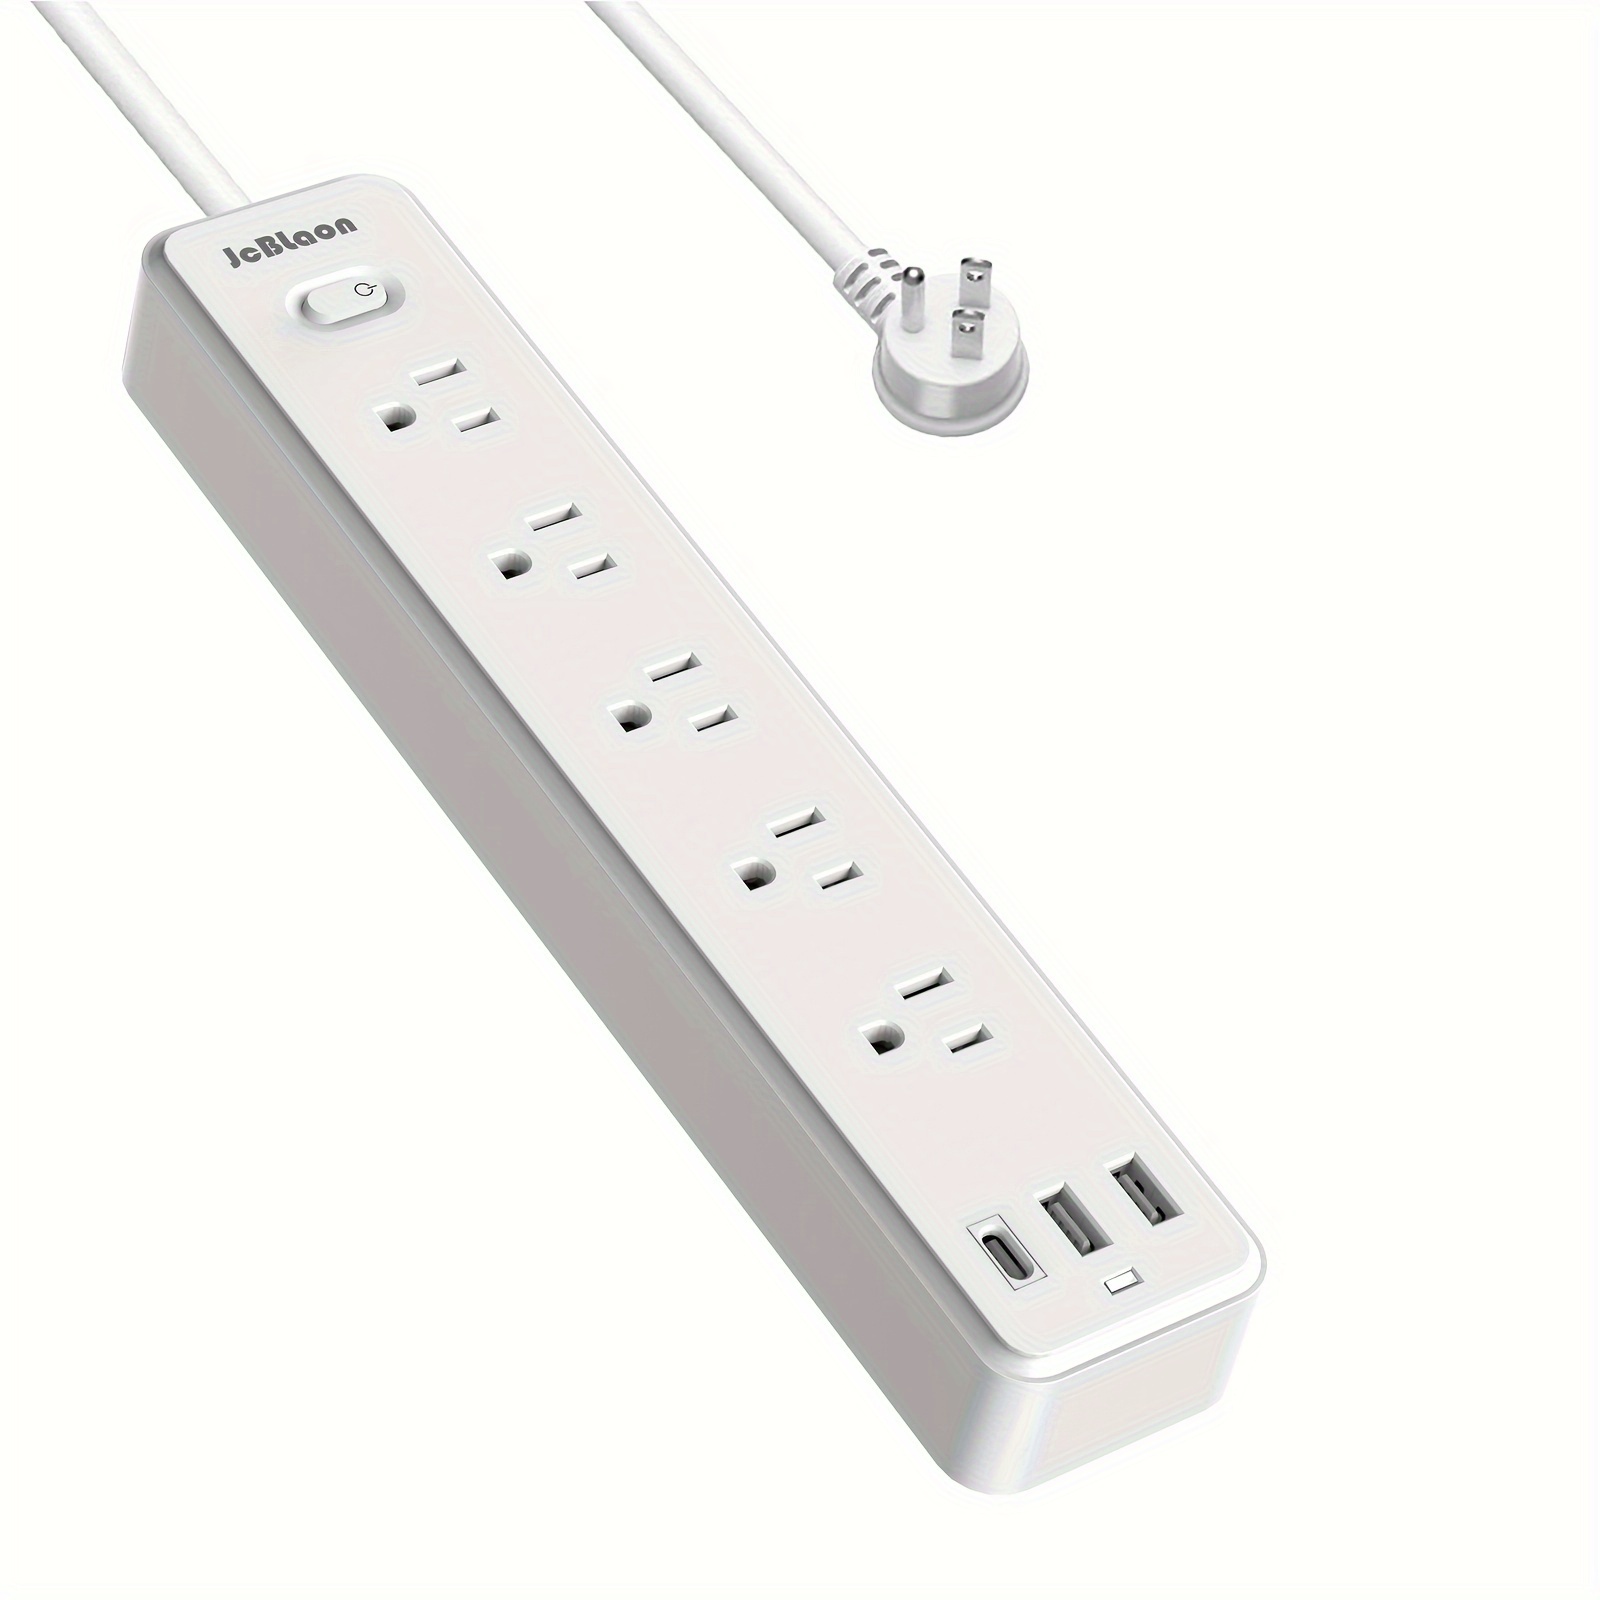 6FT Power Strip w/ Surge Protection, Mountable, Easy-to-Install